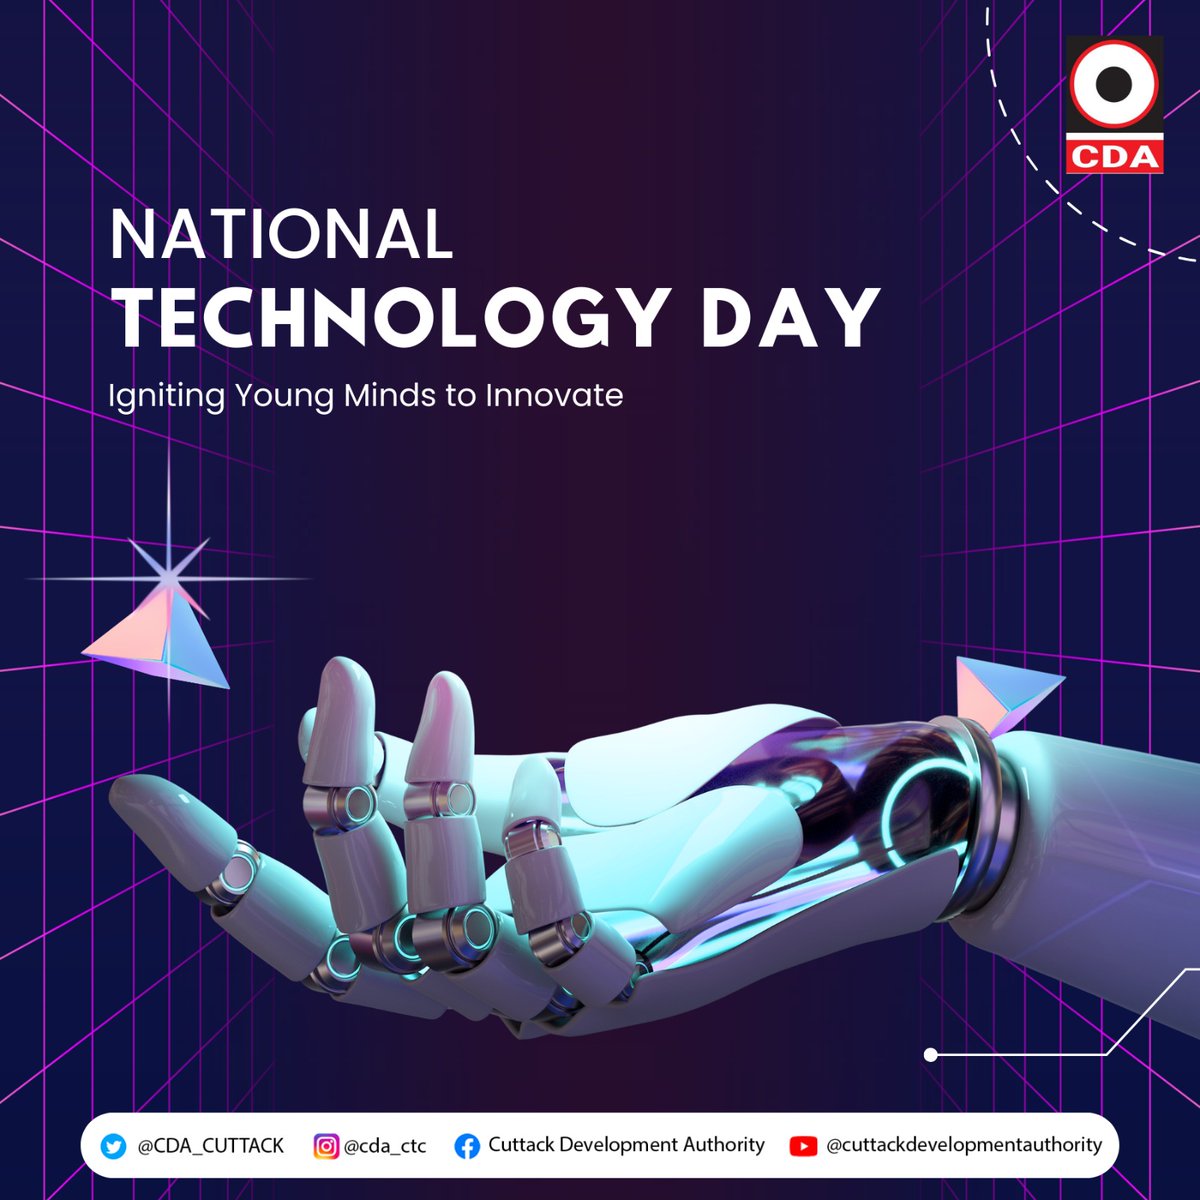 Let's honour the brilliant minds who are shaping our digital future, pushing boundaries and turning the unimaginable into reality with each passing day.

Happy National Technology Day!

#TechInnovators #DigitalFuture #NationalTechDay  #CDA #CuttackDevelopmentAuthority #Cuttack